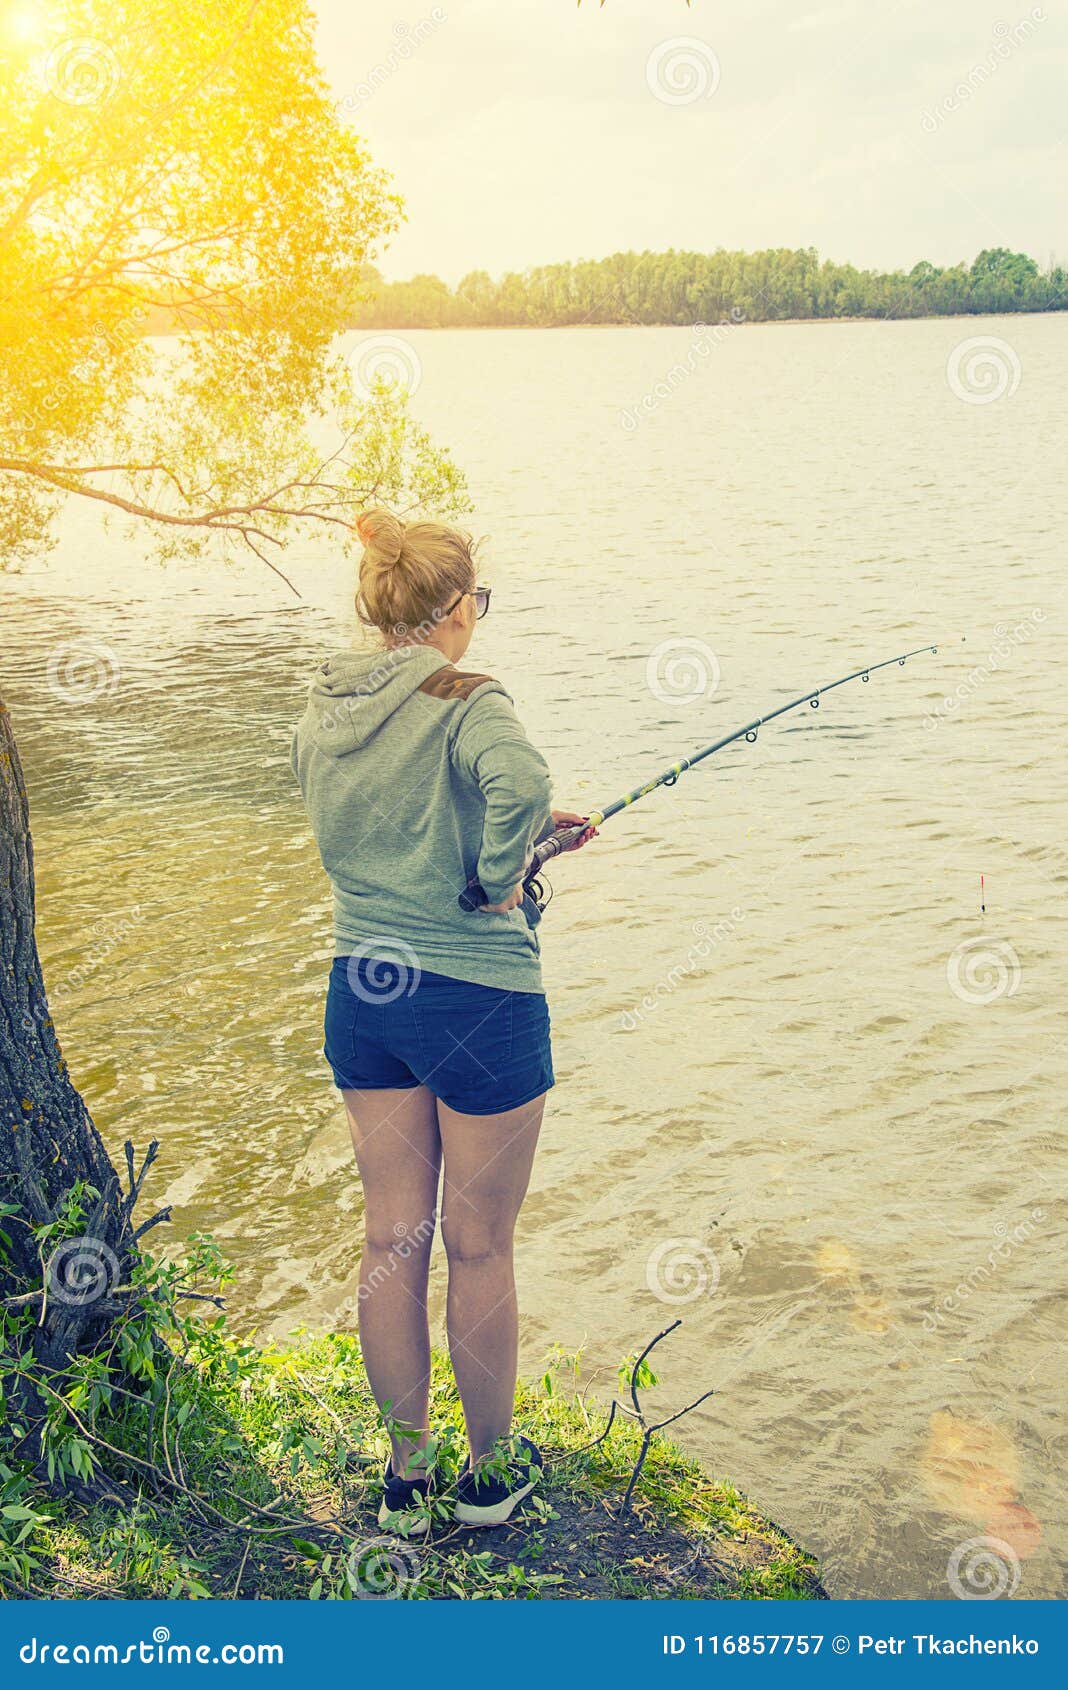 Girl with Fishing Rod Fishing in the Pond Stock Image - Image of